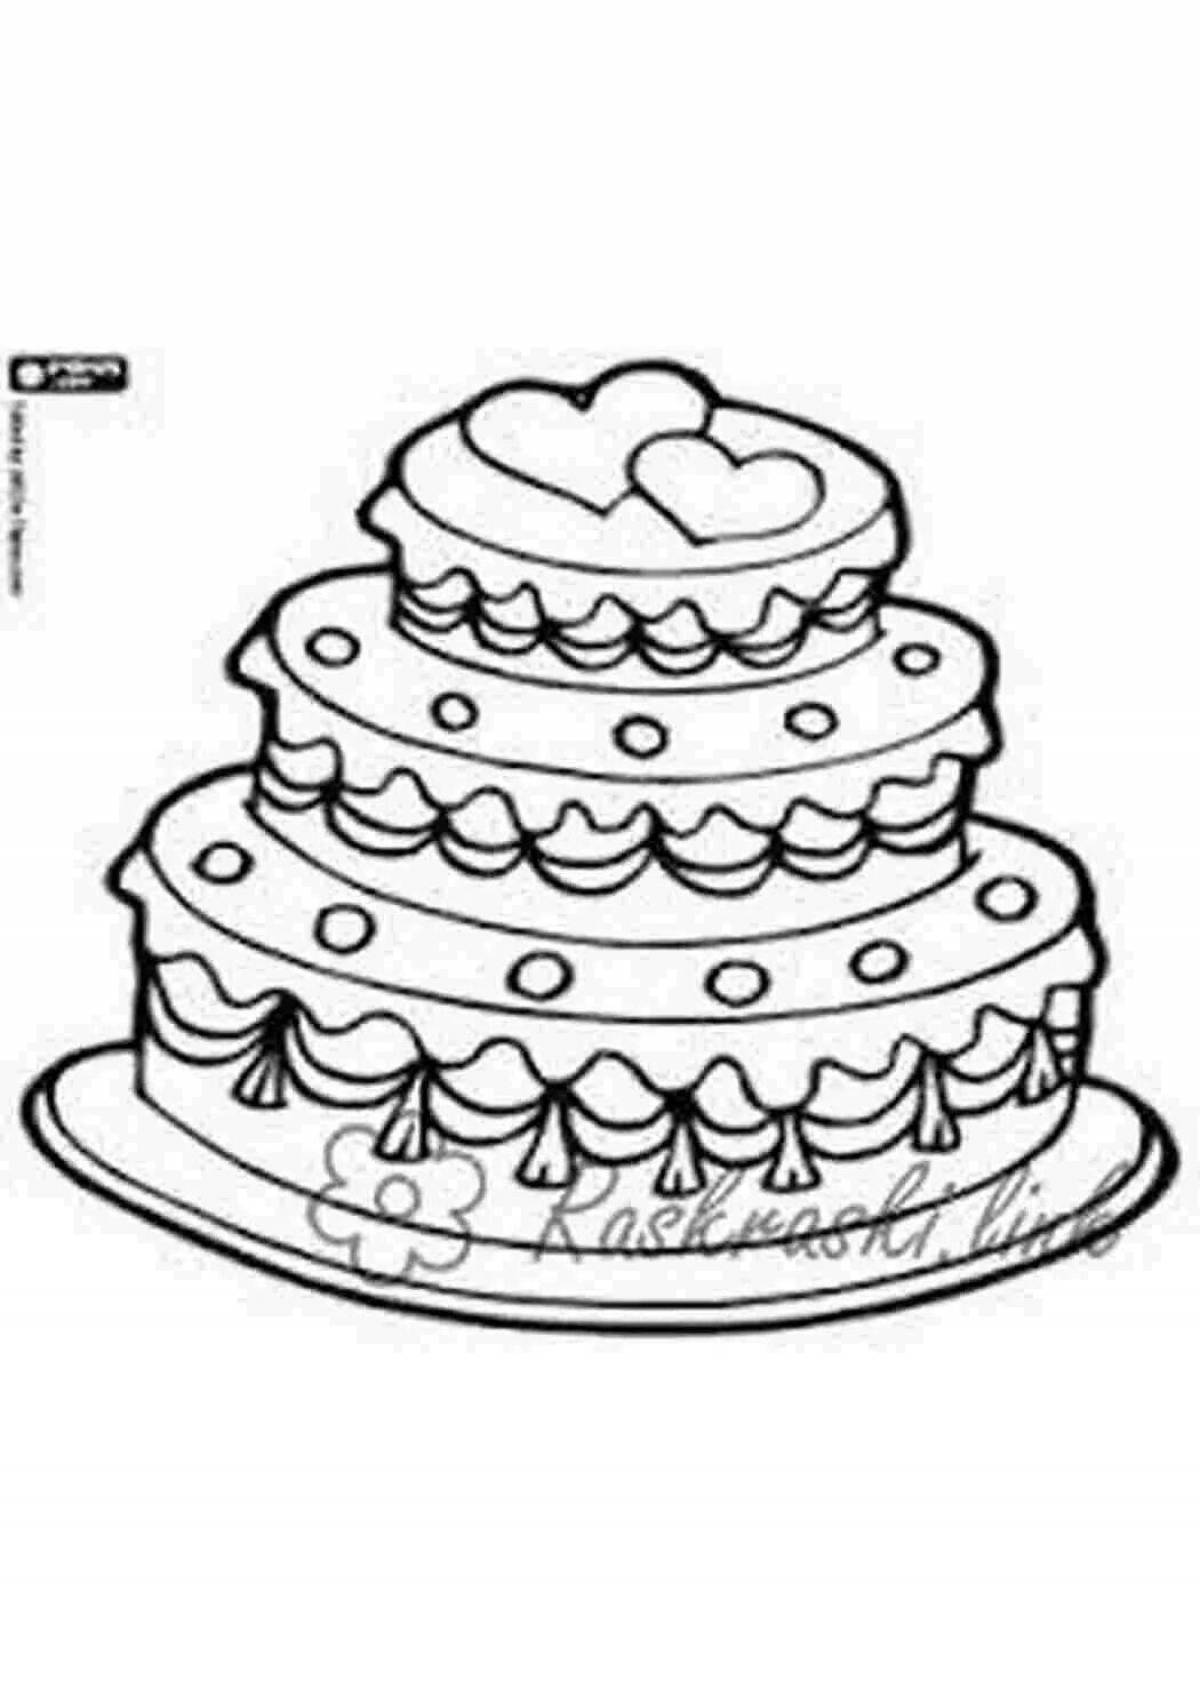 Colored explosive cakes coloring book for children 5-6 years old